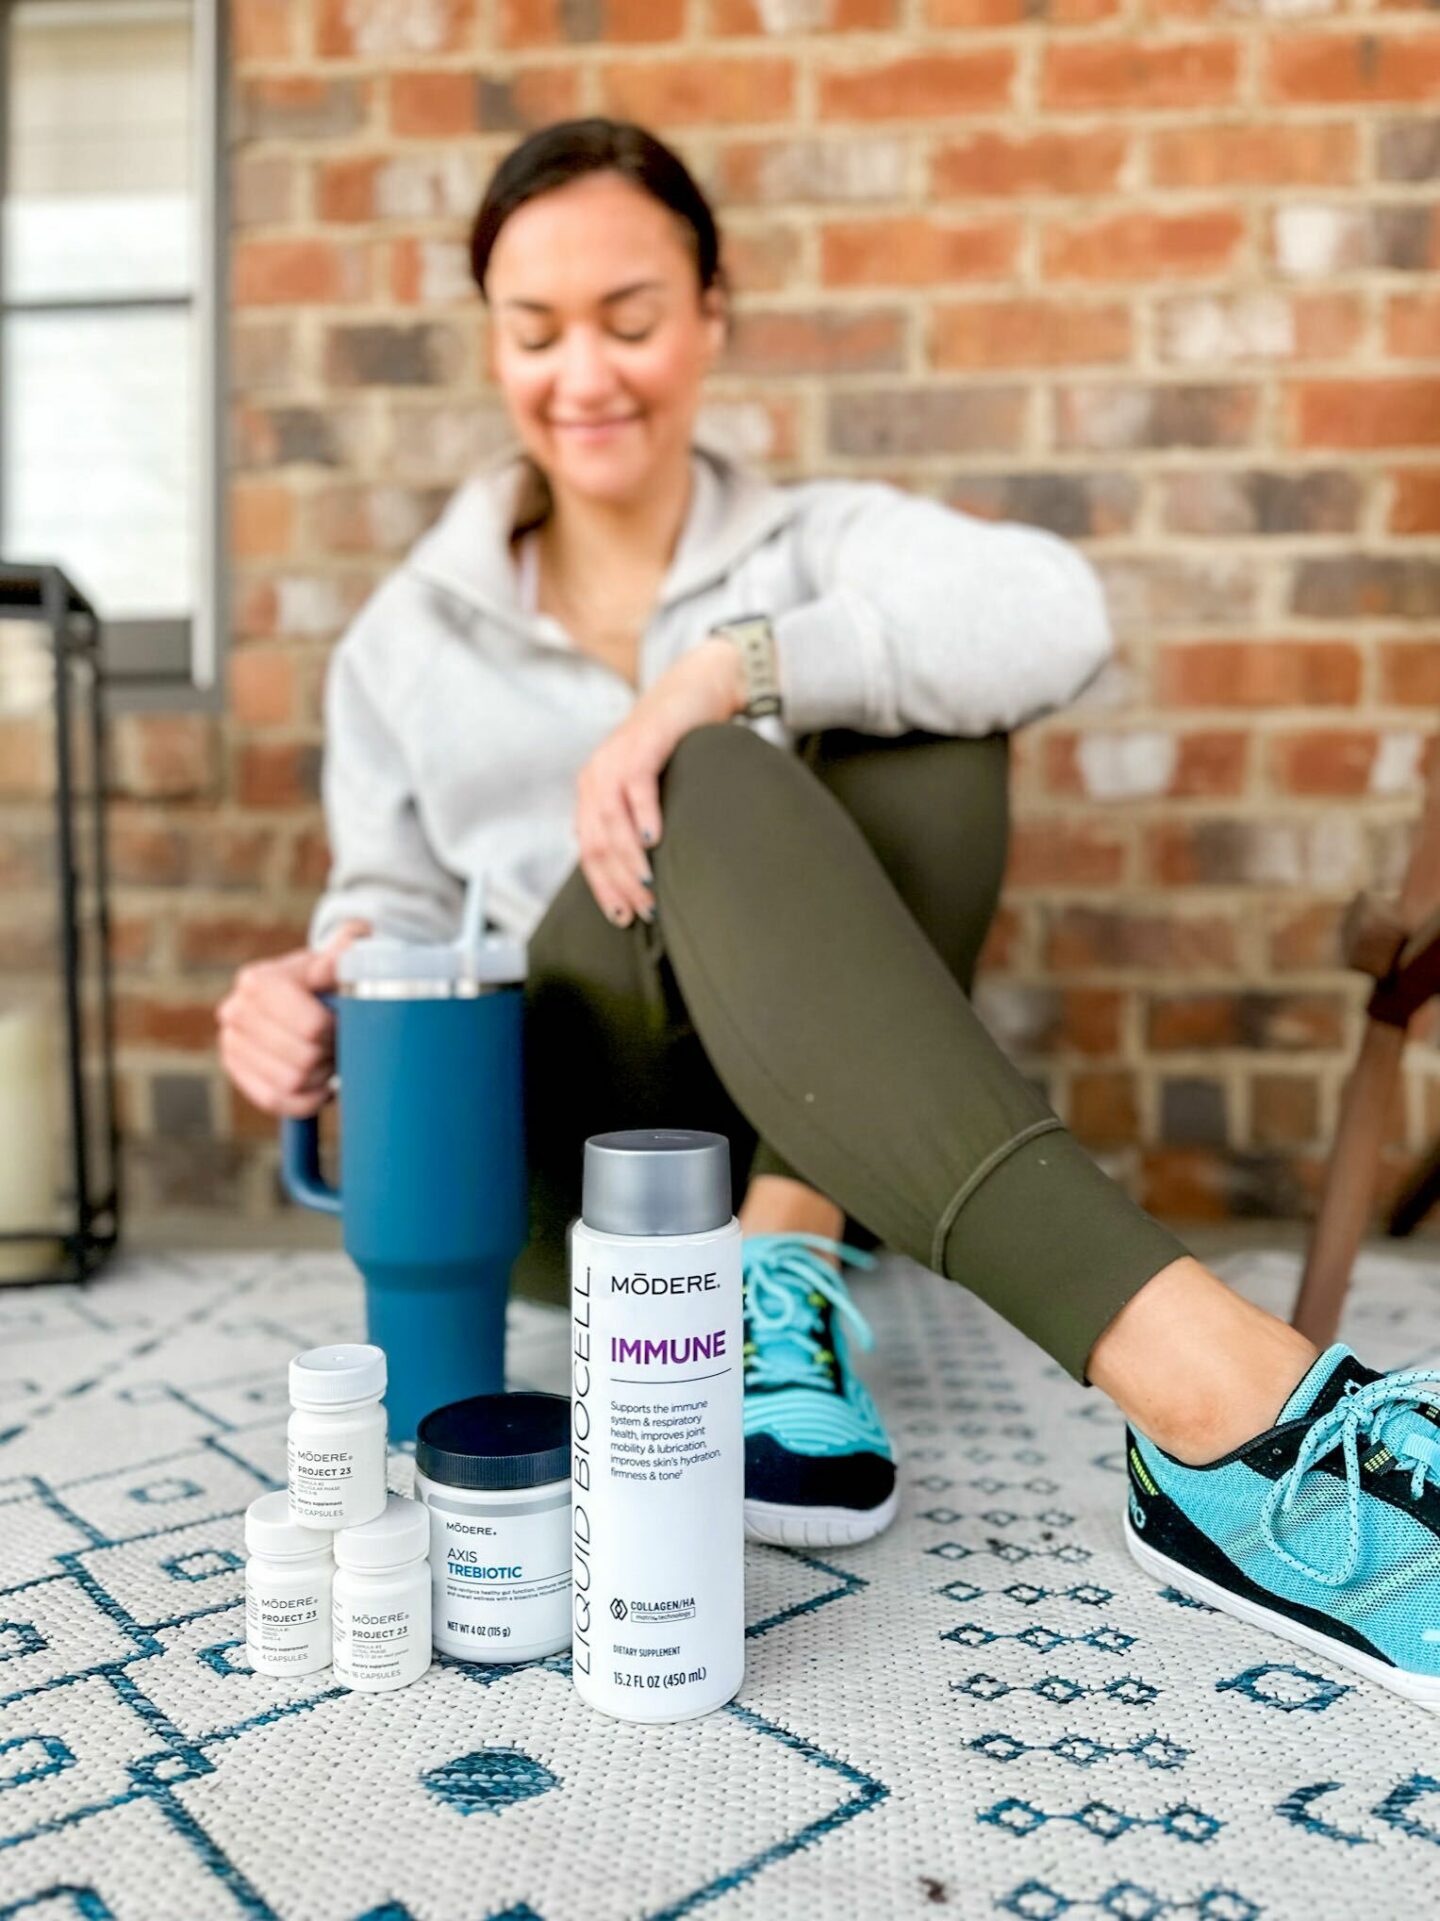 Christian Birmingham podcaster, boy mom, & health coach, Heather Brown, shares how to balance hormones with Modere's newest Ova hormone product for perimenopause, menopause, and periods. 